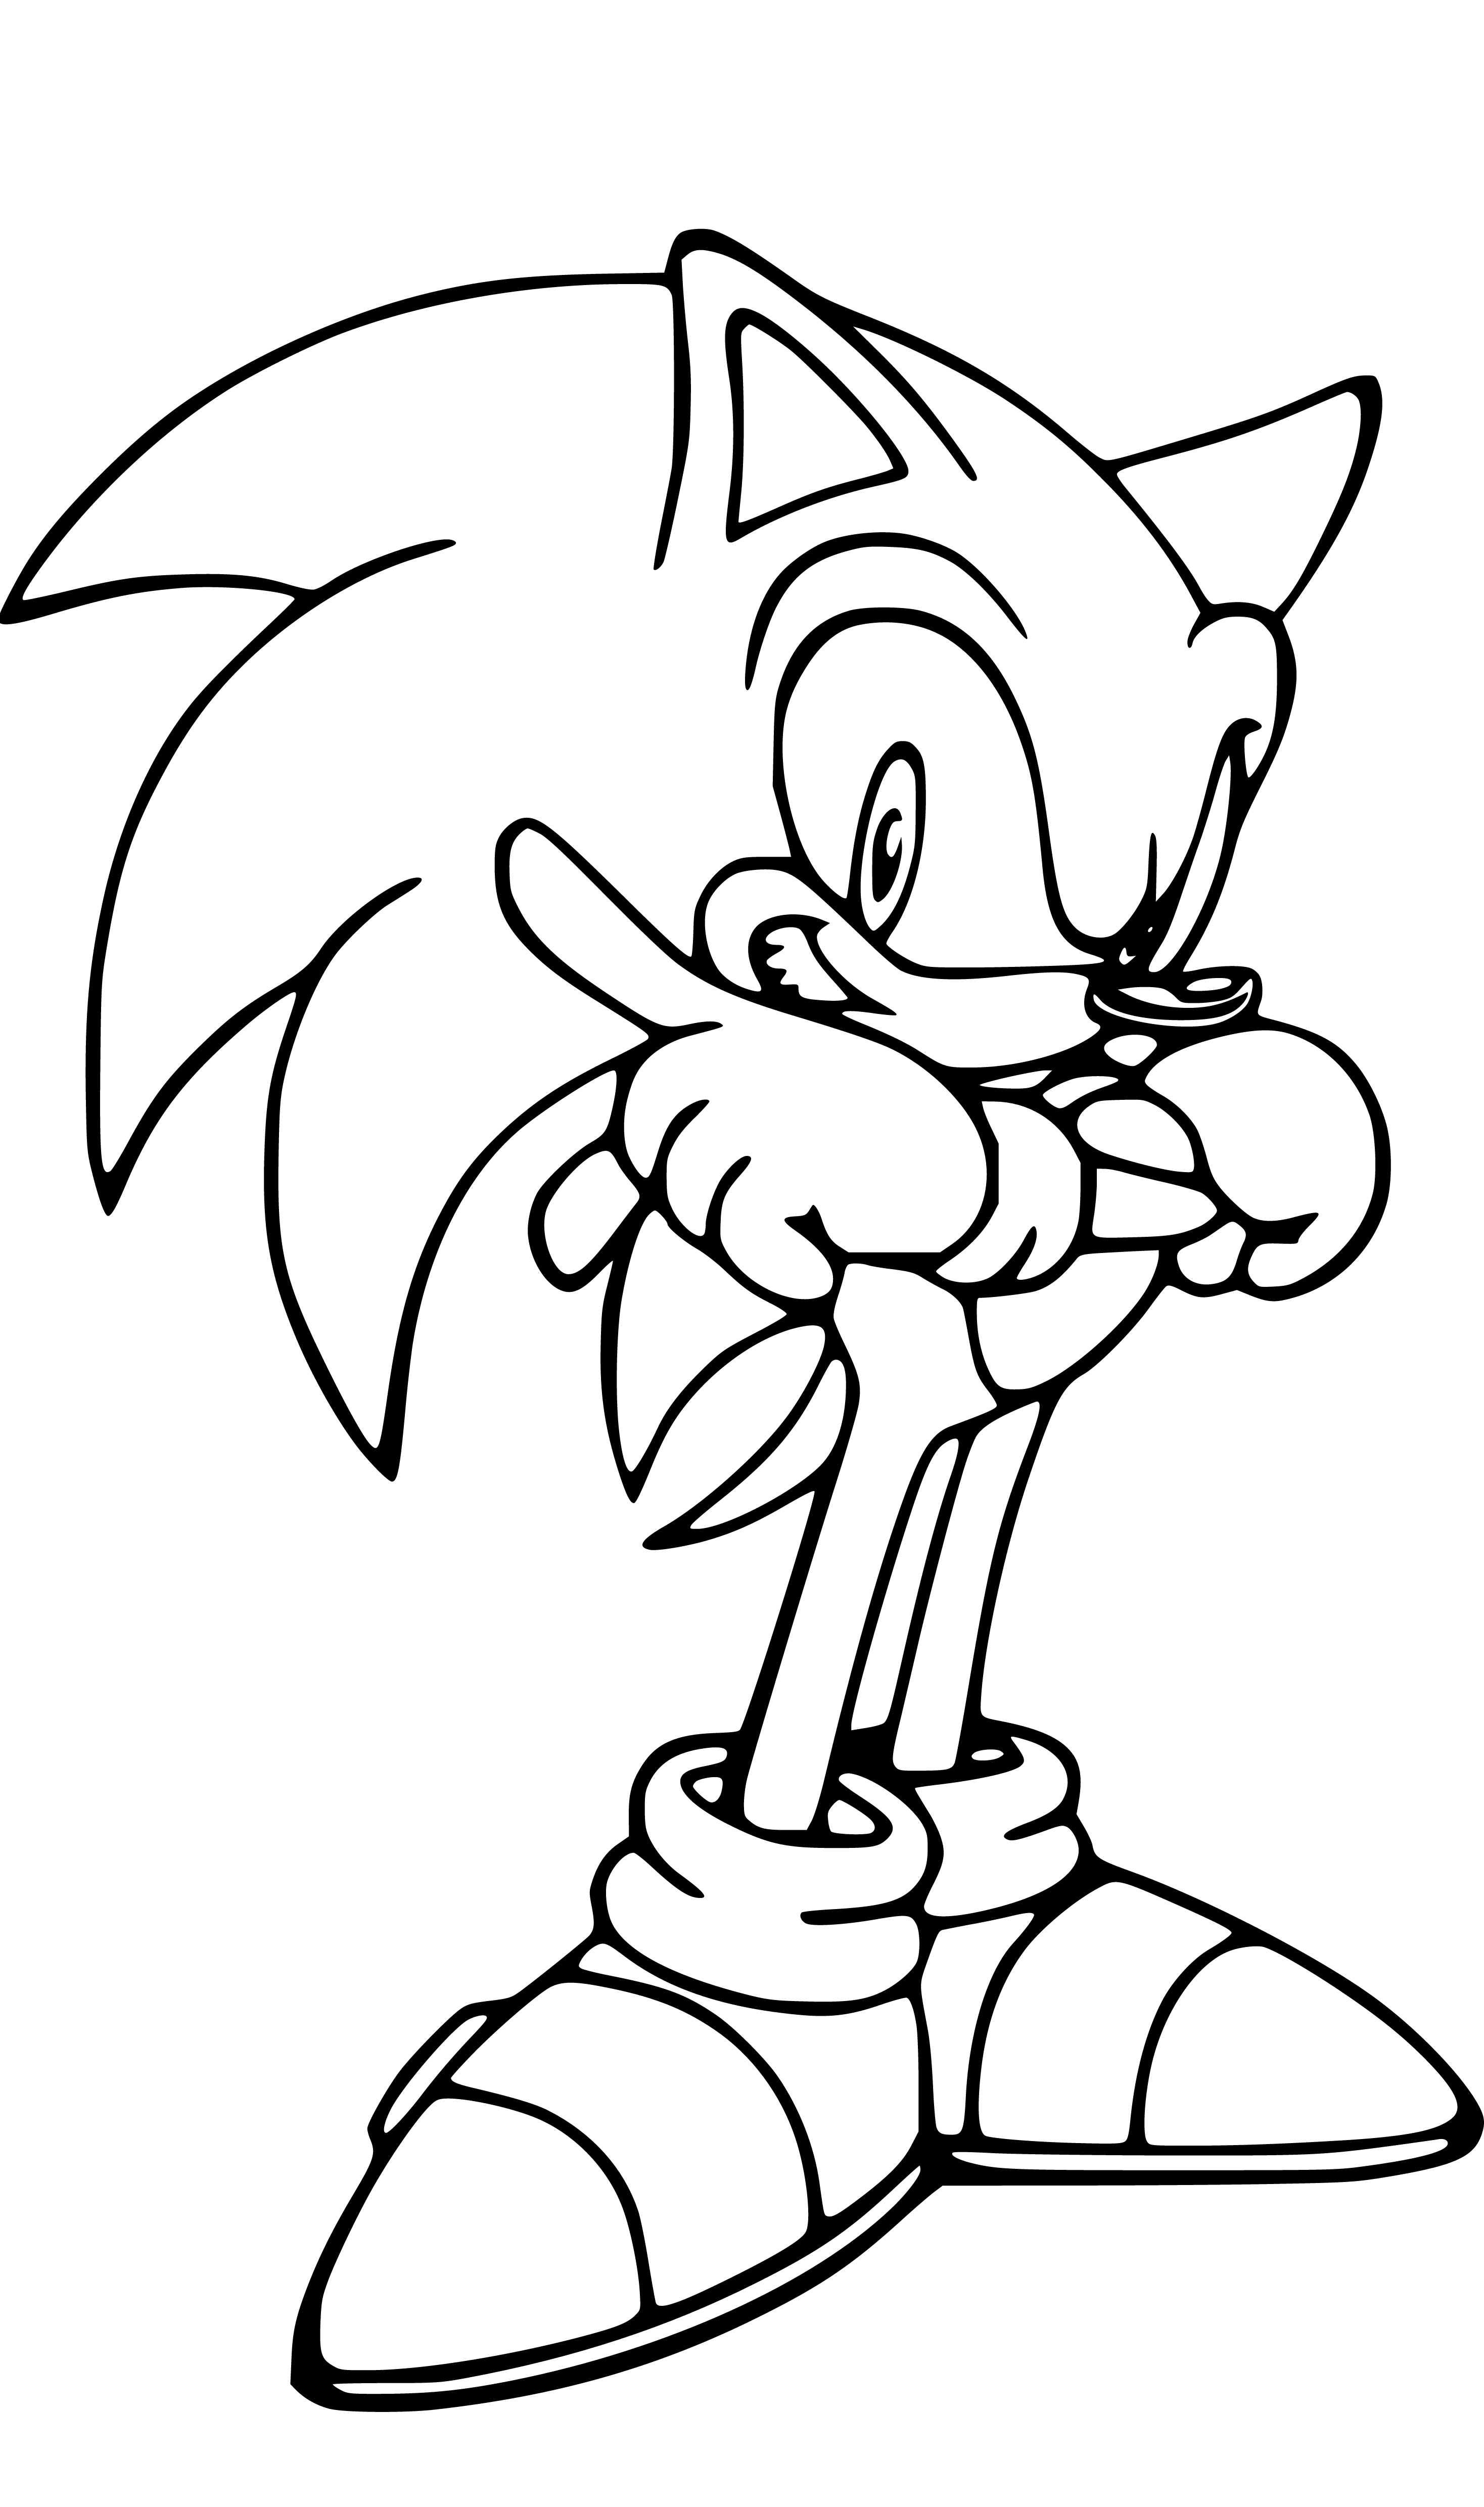 Printable Sonic the Hedhehog Drawing BW Coloring Page for kids.